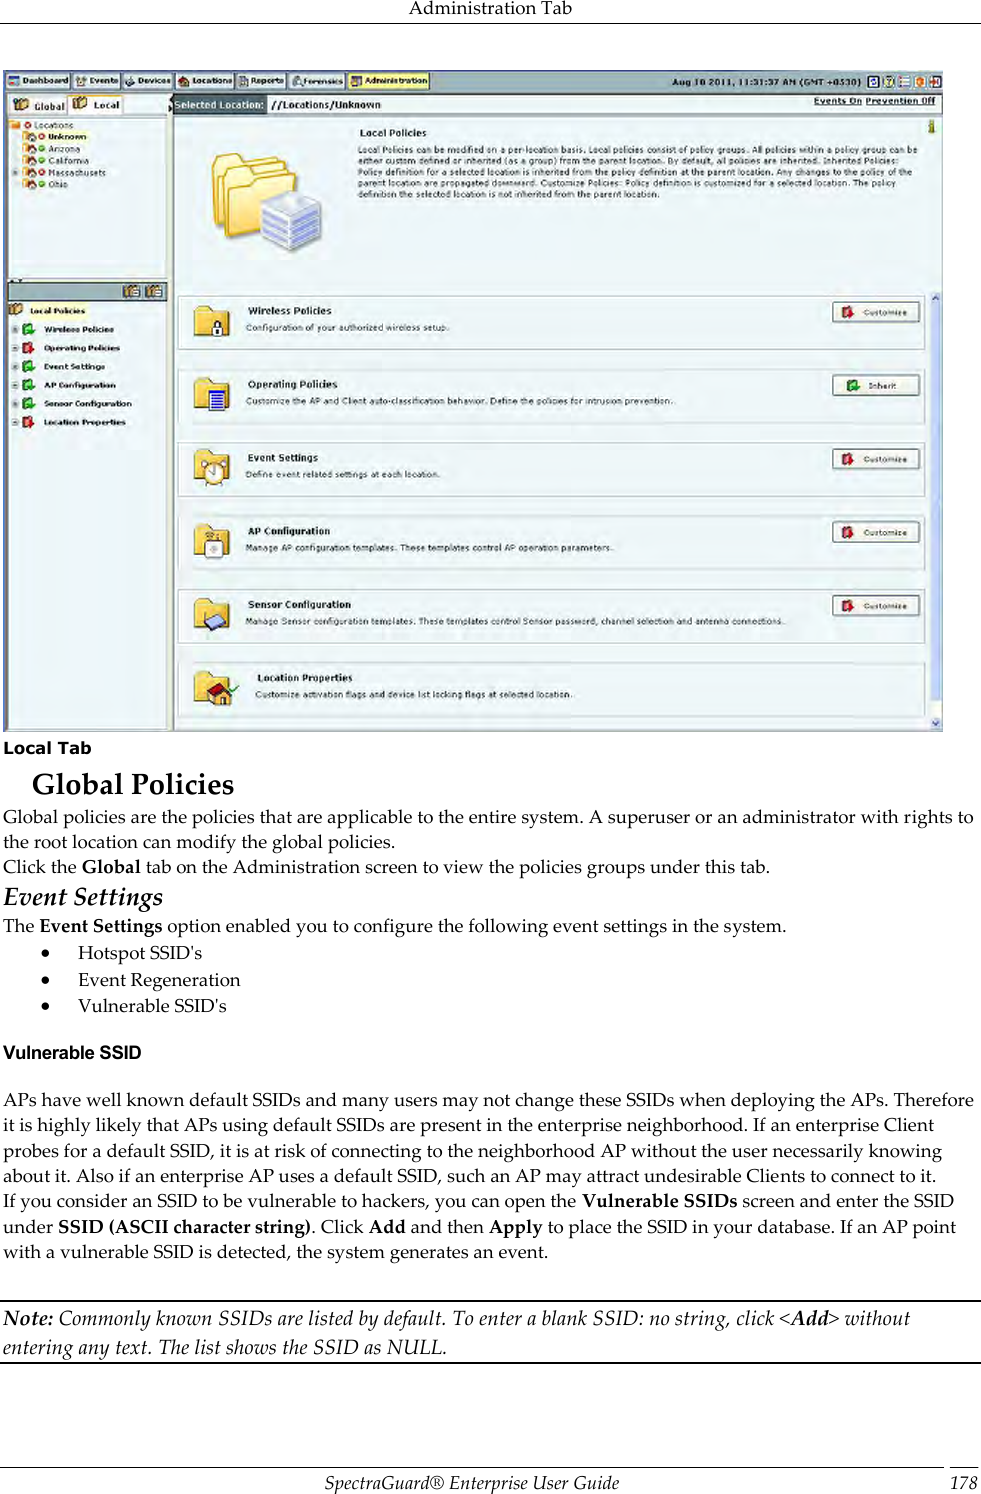 Administration Tab SpectraGuard®  Enterprise User Guide 178  Local Tab Global Policies Global policies are the policies that are applicable to the entire system. A superuser or an administrator with rights to the root location can modify the global policies. Click the Global tab on the Administration screen to view the policies groups under this tab. Event Settings The Event Settings option enabled you to configure the following event settings in the system.  Hotspot SSID&apos;s  Event Regeneration  Vulnerable SSID&apos;s Vulnerable SSID APs have well known default SSIDs and many users may not change these SSIDs when deploying the APs. Therefore it is highly likely that APs using default SSIDs are present in the enterprise neighborhood. If an enterprise Client probes for a default SSID, it is at risk of connecting to the neighborhood AP without the user necessarily knowing about it. Also if an enterprise AP uses a default SSID, such an AP may attract undesirable Clients to connect to it. If you consider an SSID to be vulnerable to hackers, you can open the Vulnerable SSIDs screen and enter the SSID under SSID (ASCII character string). Click Add and then Apply to place the SSID in your database. If an AP point with a vulnerable SSID is detected, the system generates an event.   Note: Commonly known SSIDs are listed by default. To enter a blank SSID: no string, click &lt;Add&gt; without entering any text. The list shows the SSID as NULL.   